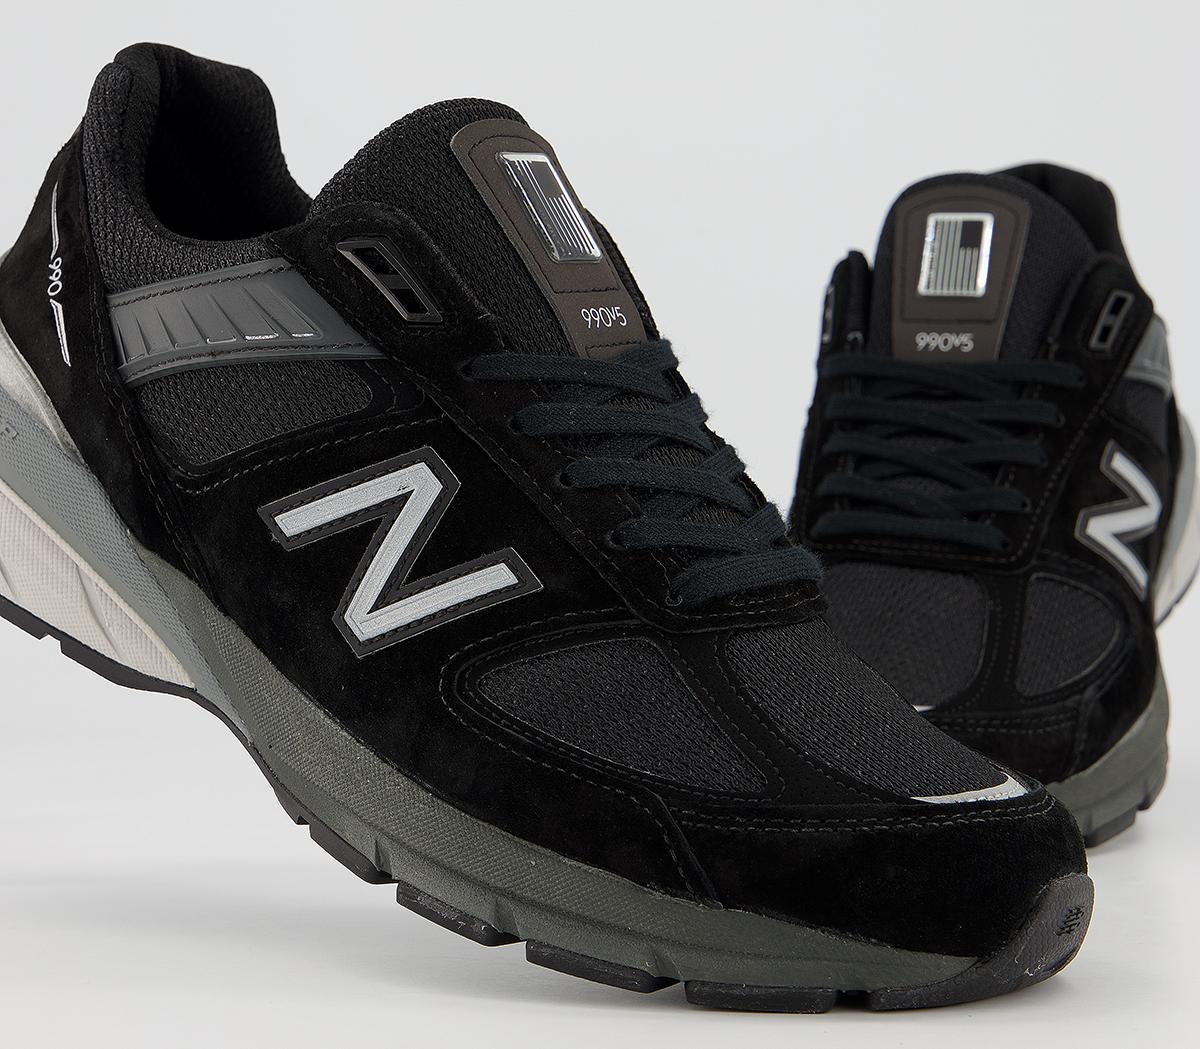 New Balance 990 Trainers Black - His trainers